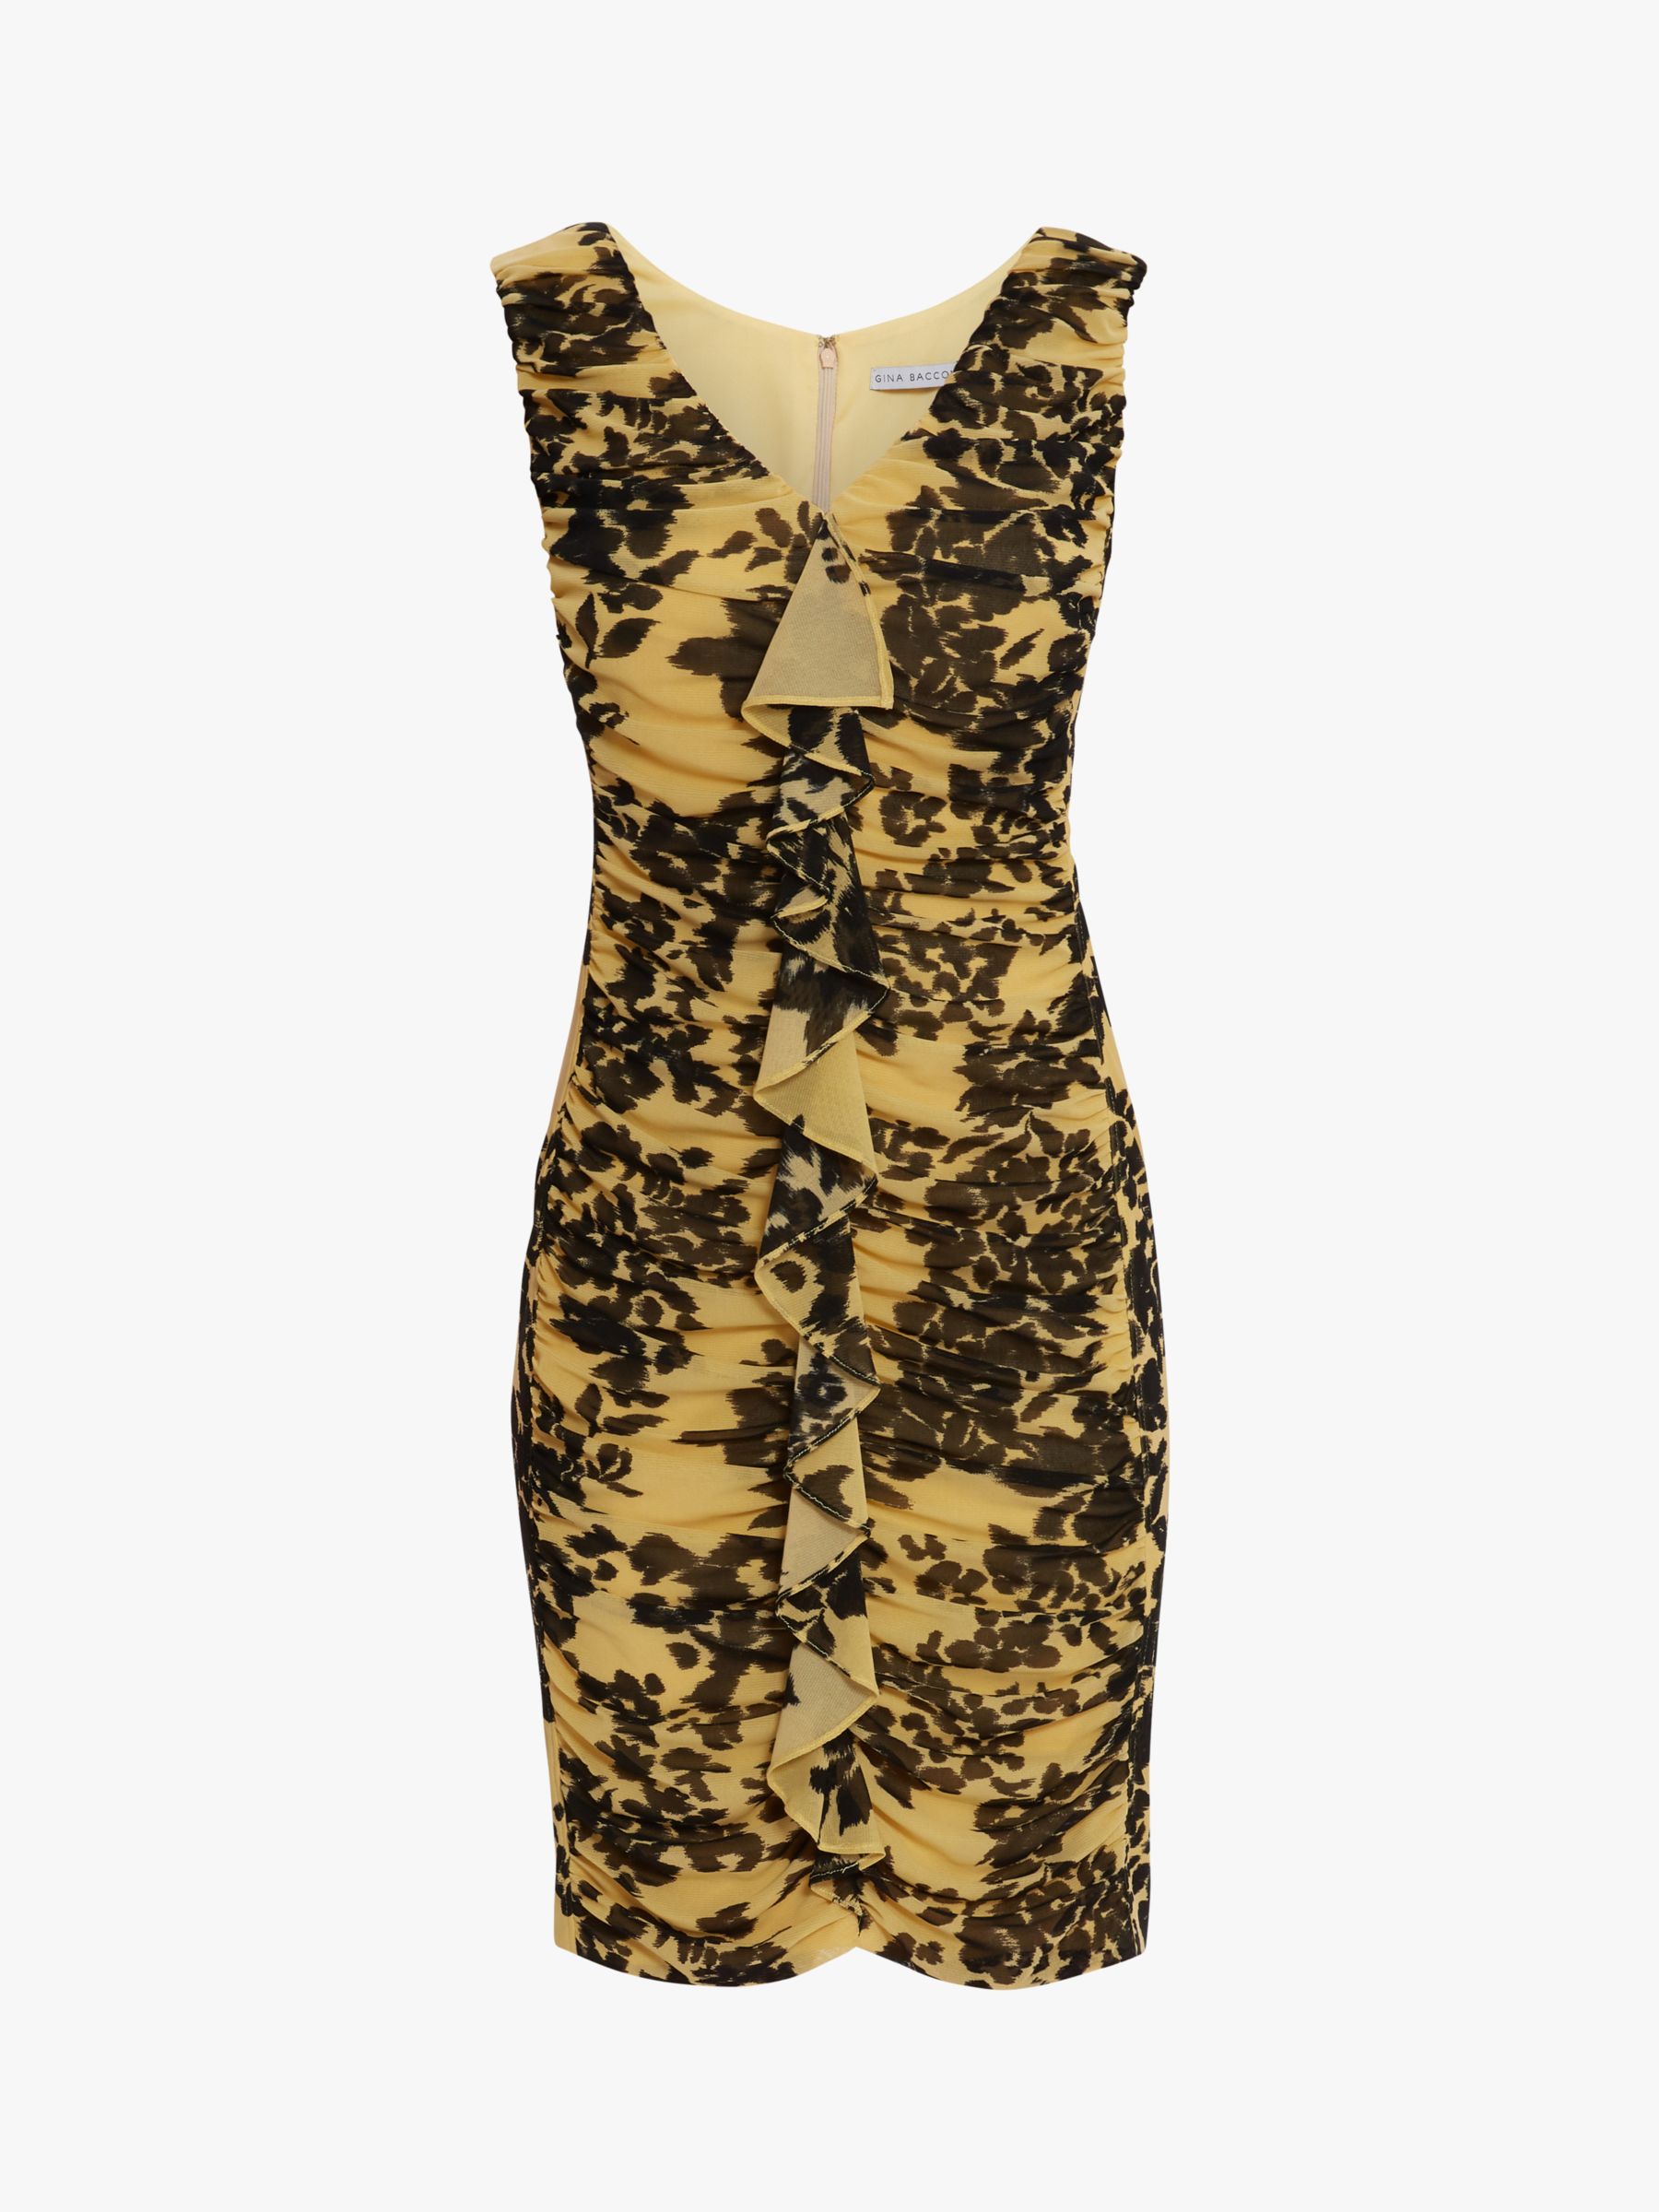 Buy Gina Bacconi Joannie Floral Mesh Dress, Yellow/Black Online at johnlewis.com